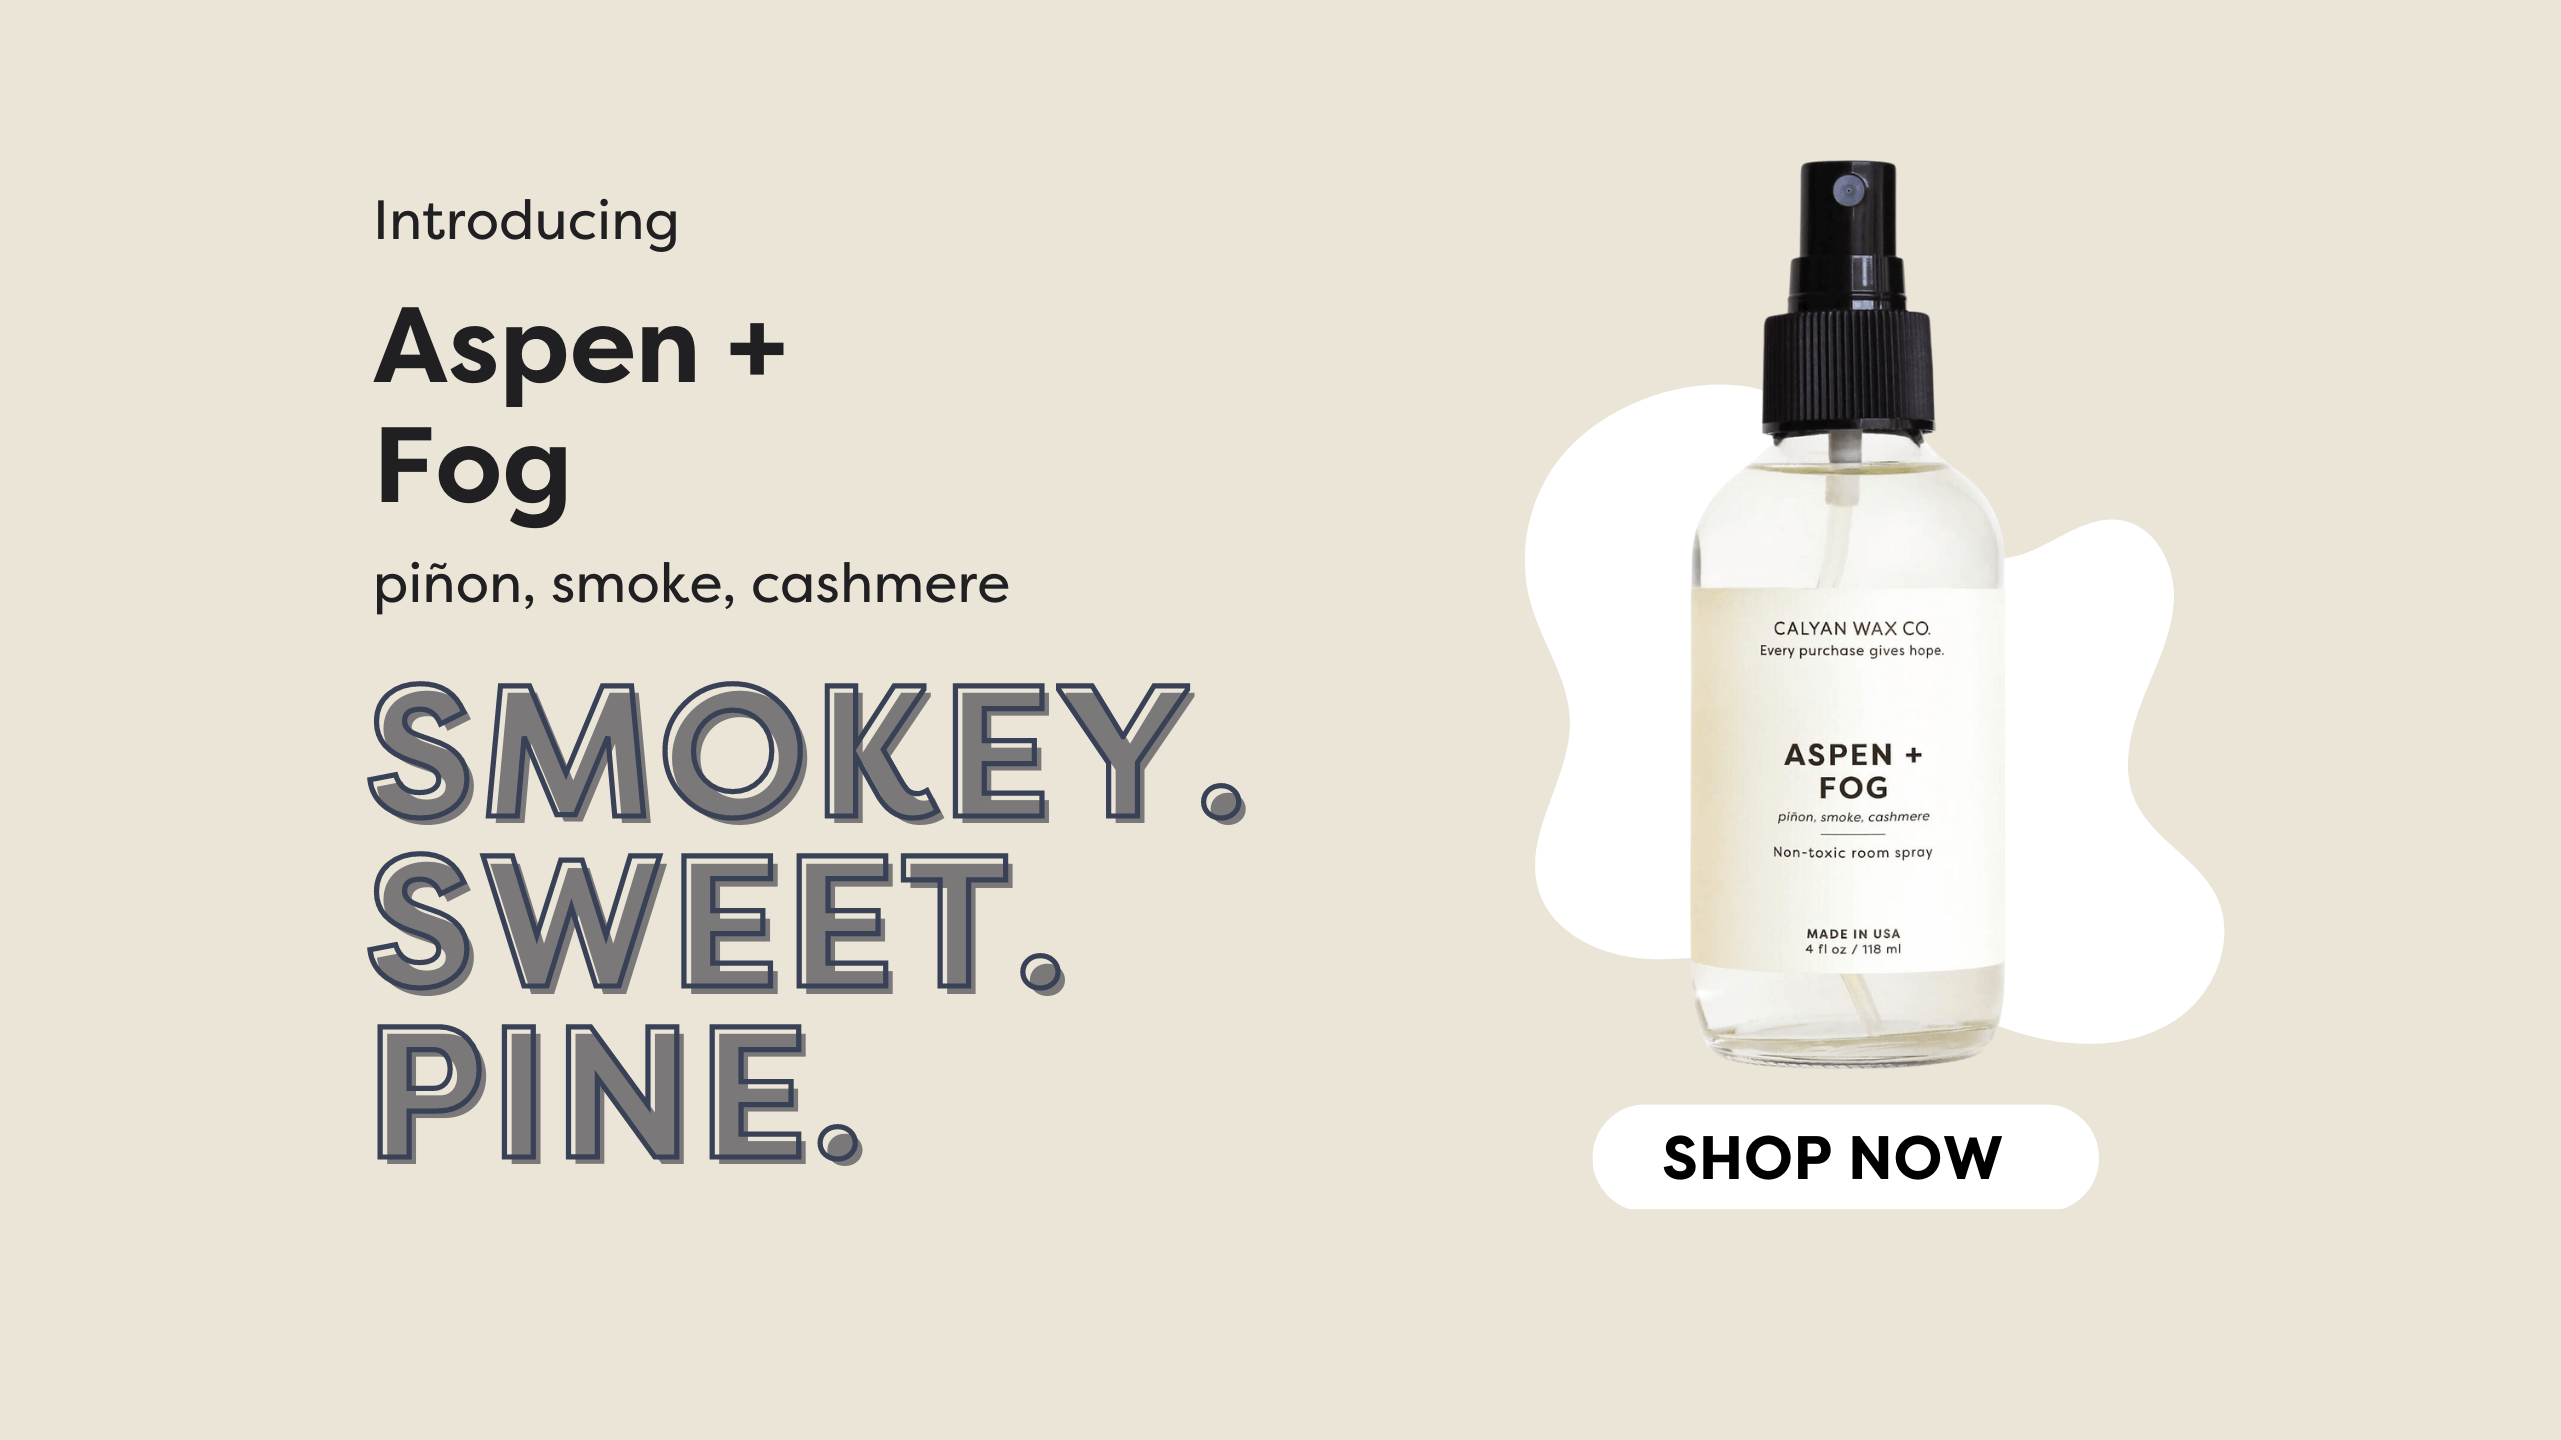 Aspen + Fog Room Spray with Buy Now Button - smells like piñon, smoke, and cashmere - sweet, smokey, and pine